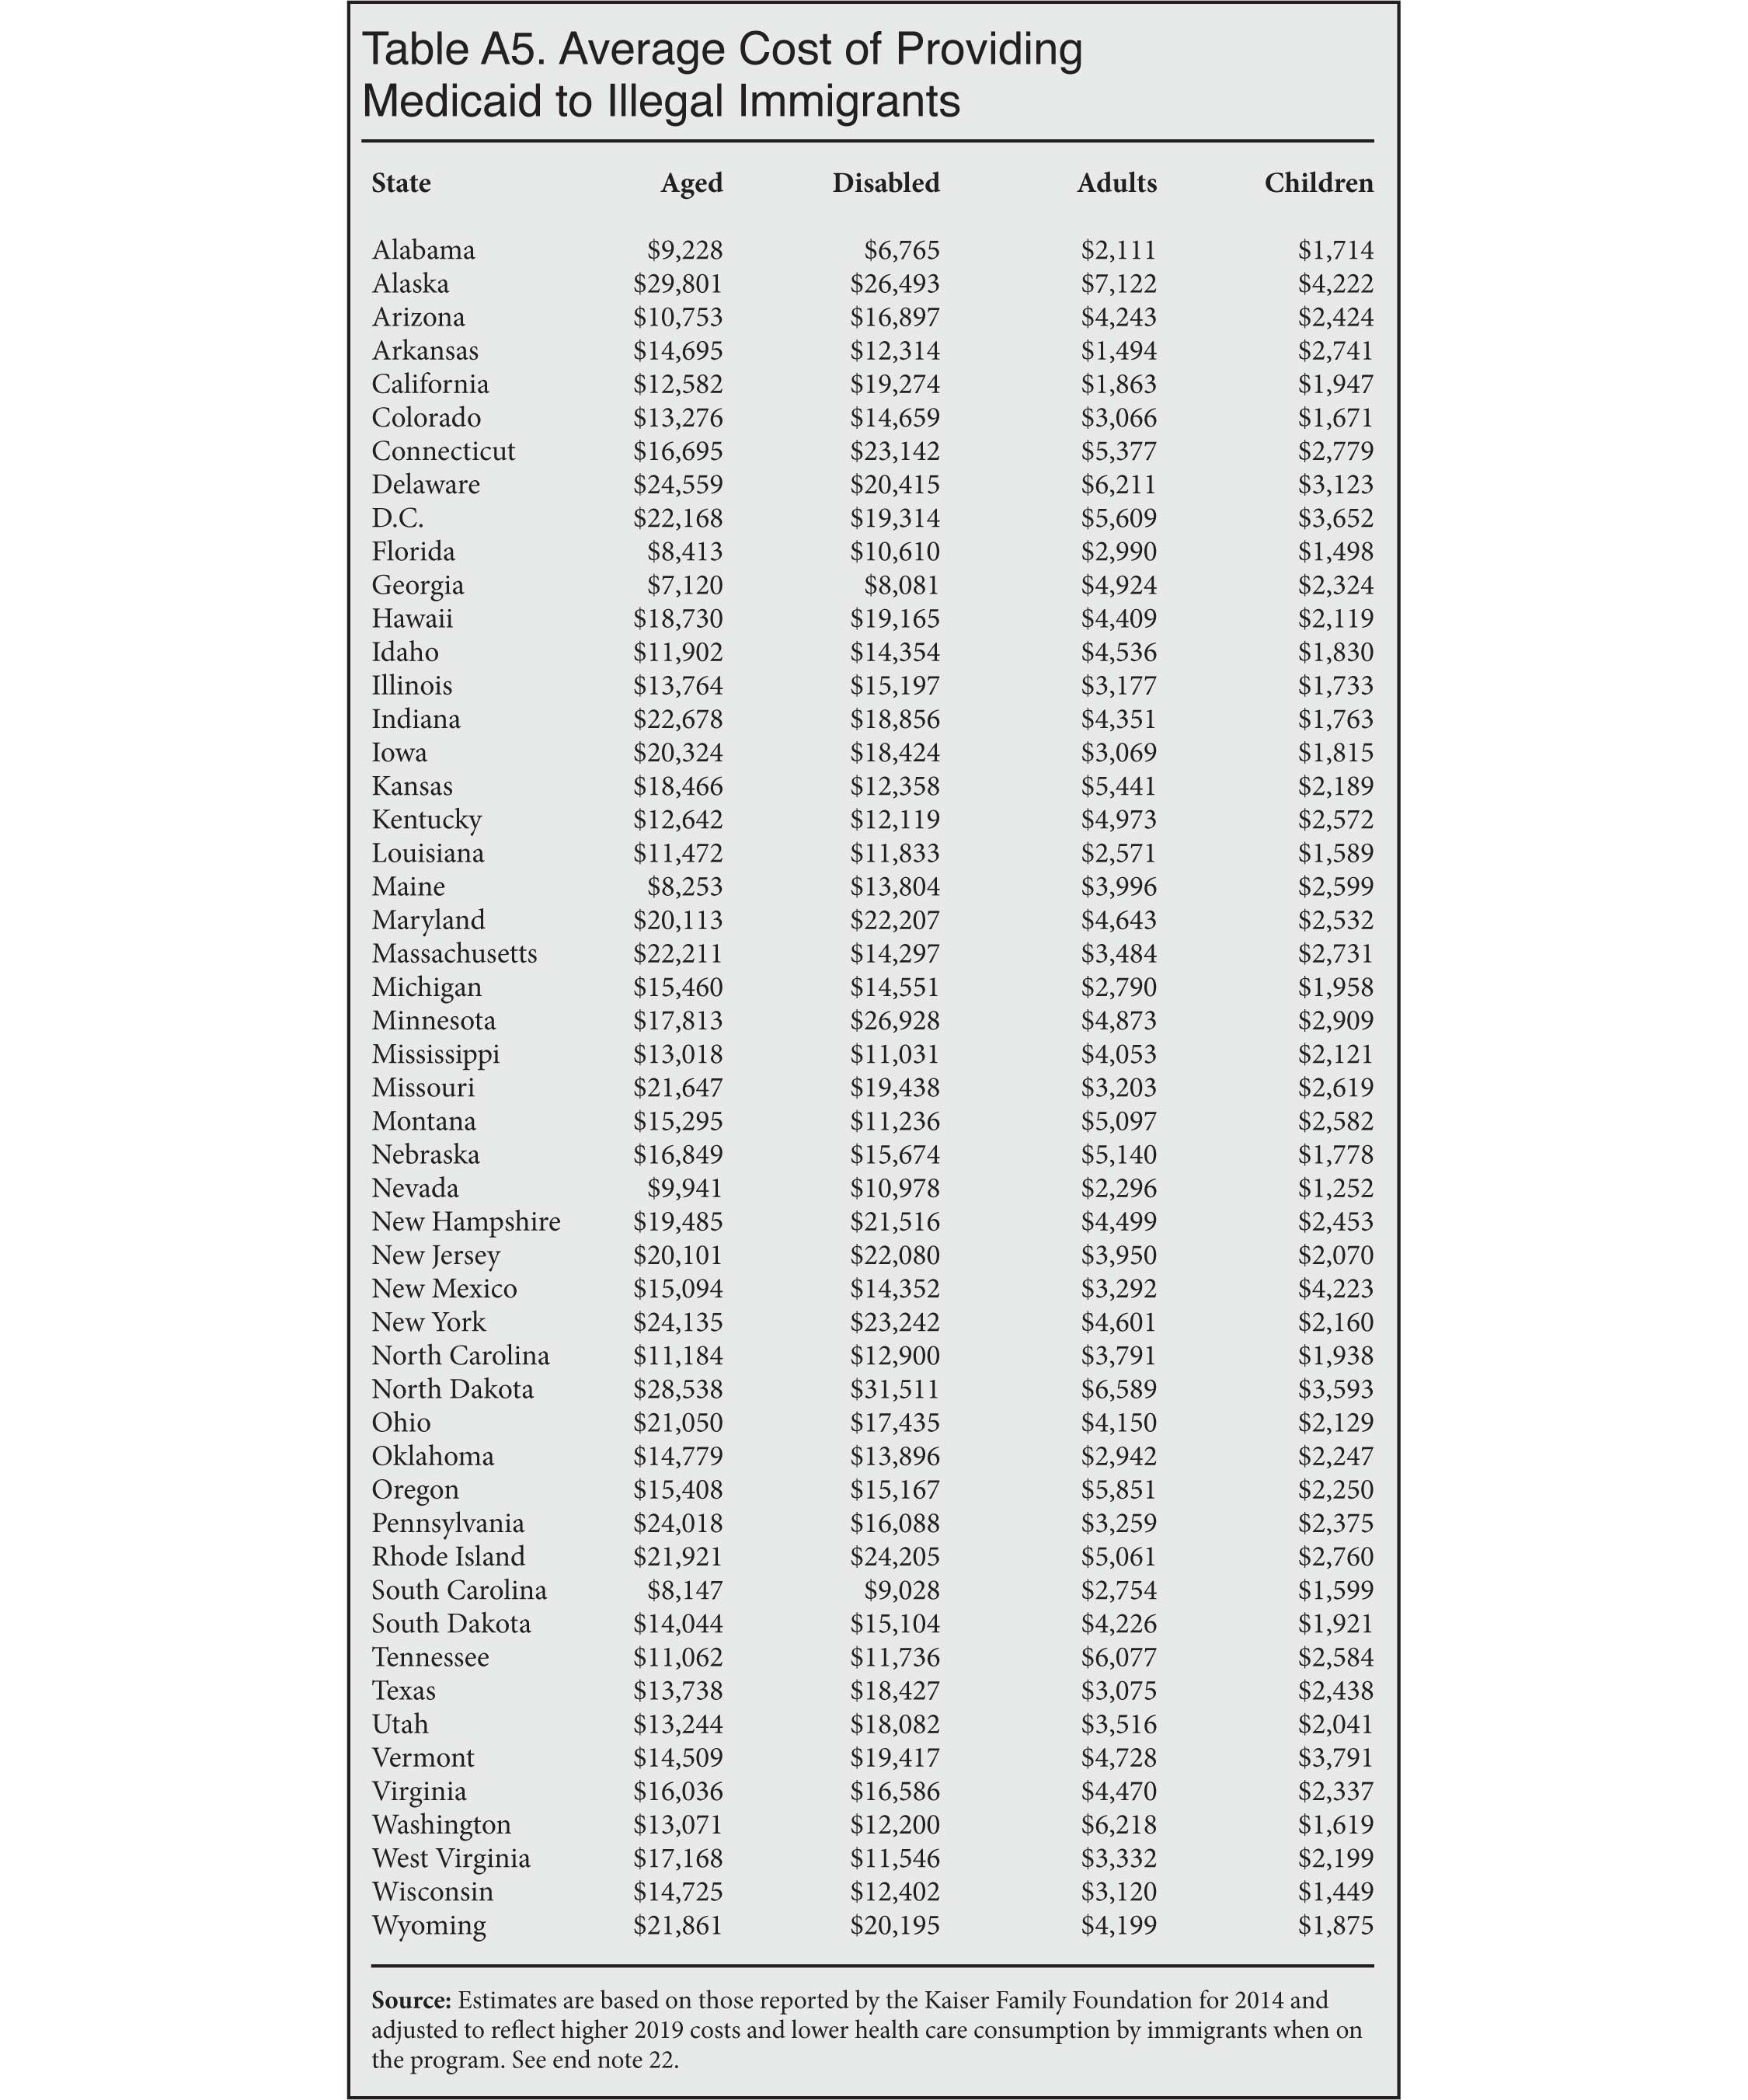 Table: Average Cost of Providing Medicaid to Illegal Immigrants